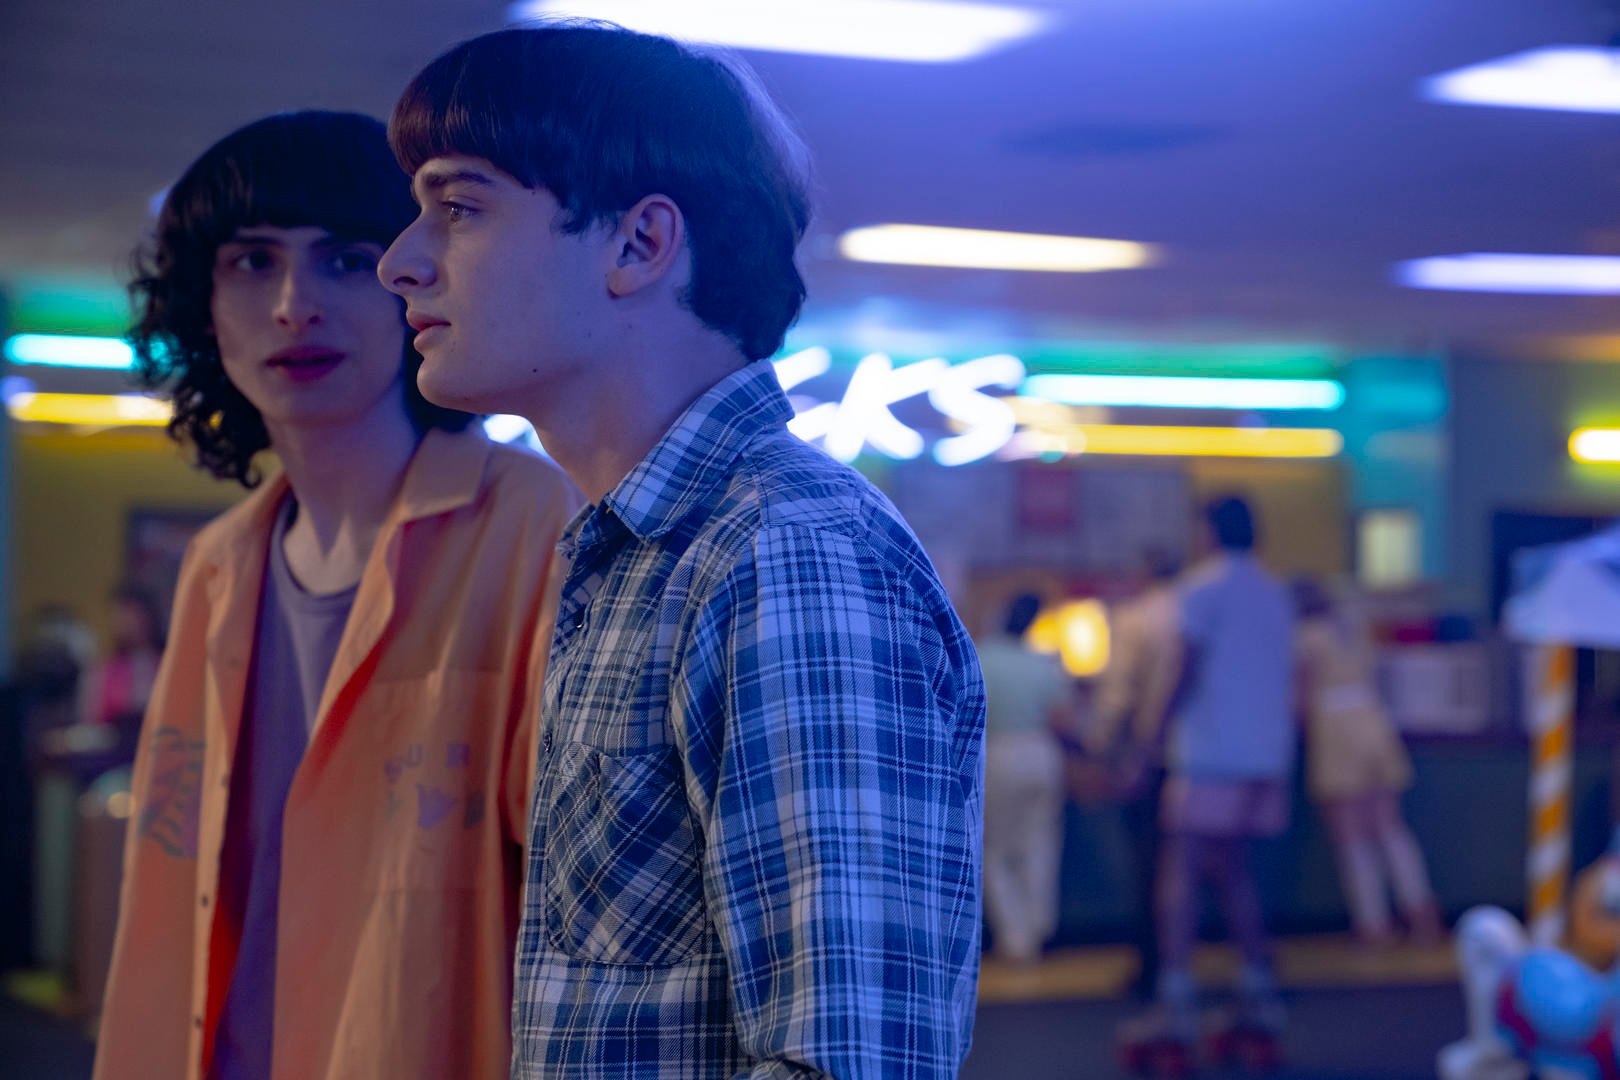 Will (Noah Schnapp), who many fans think is gay, looks annoyed as Mike (Finn Wolfhard) looks at him quizzically in 'Stranger Things' Season 4